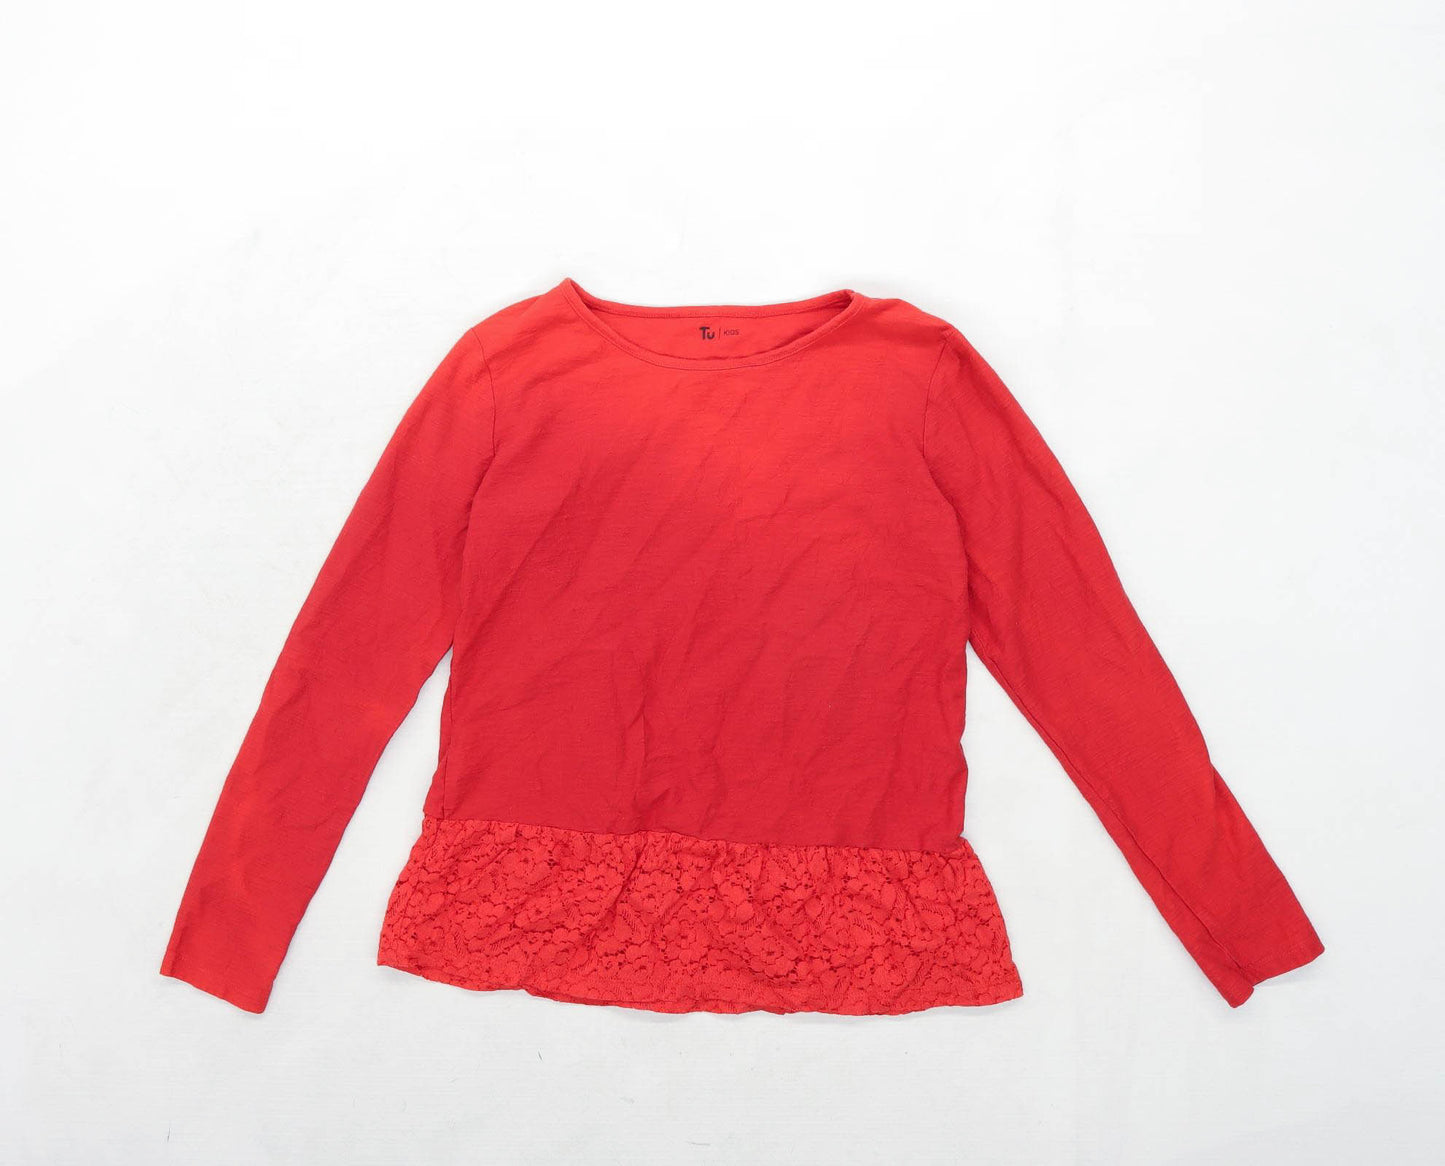 TU Girls Red Lace Ombre Top Age 13 Years